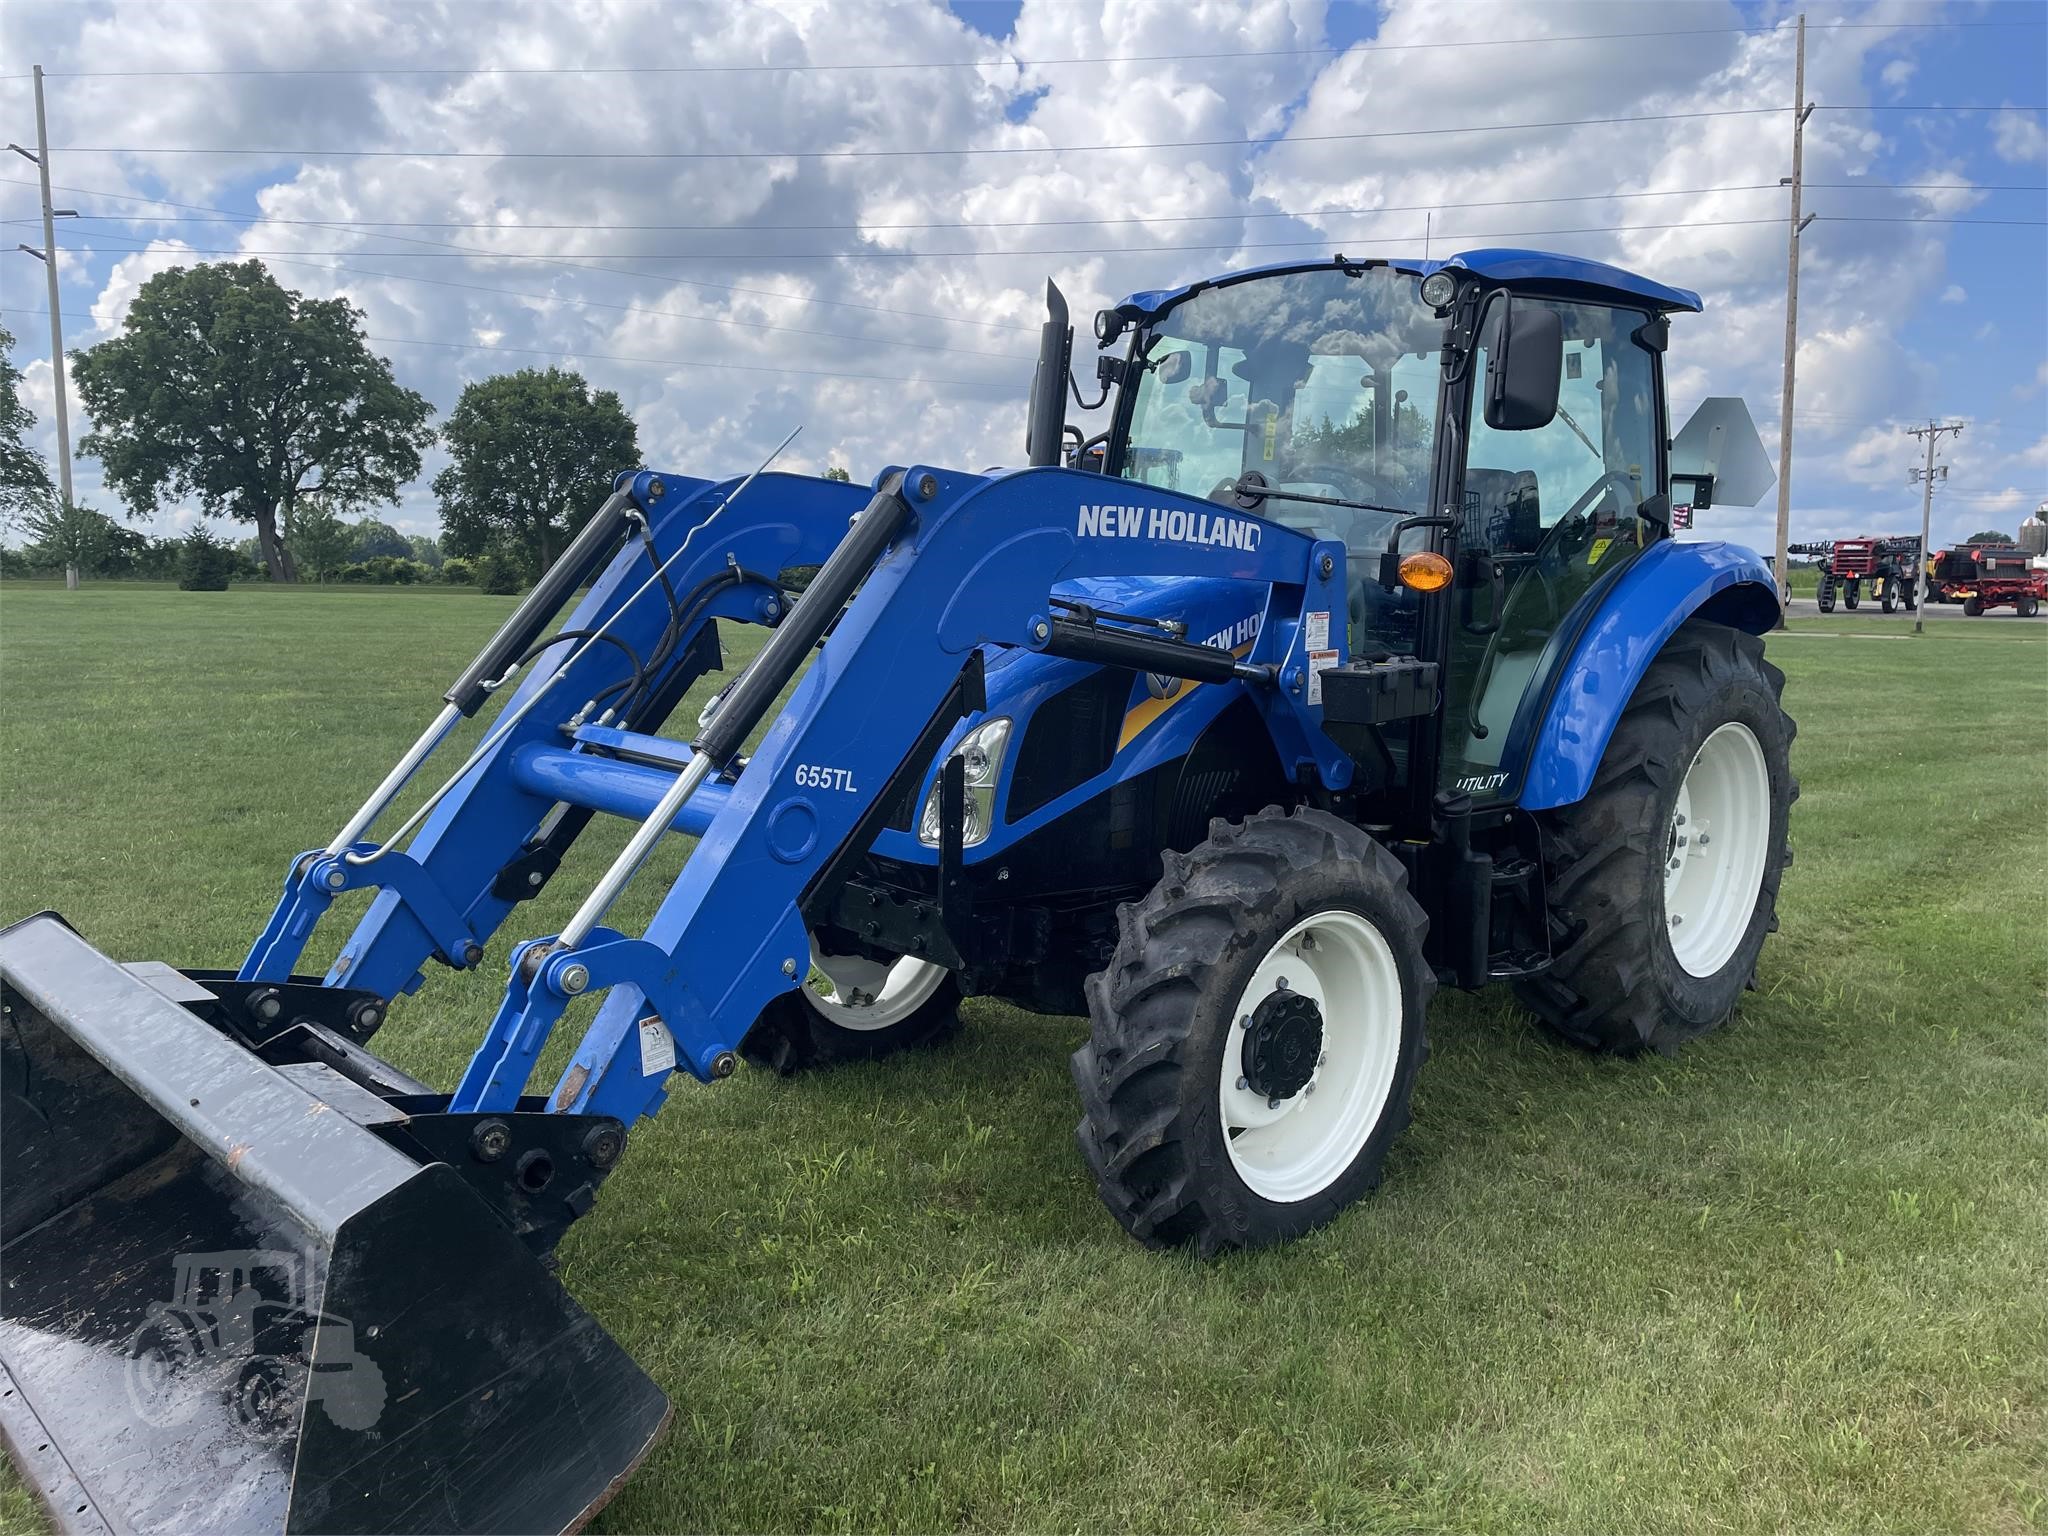 2018 NEW HOLLAND POWERSTAR 75 For Sale In Dorr, Michigan | TractorHouse.com